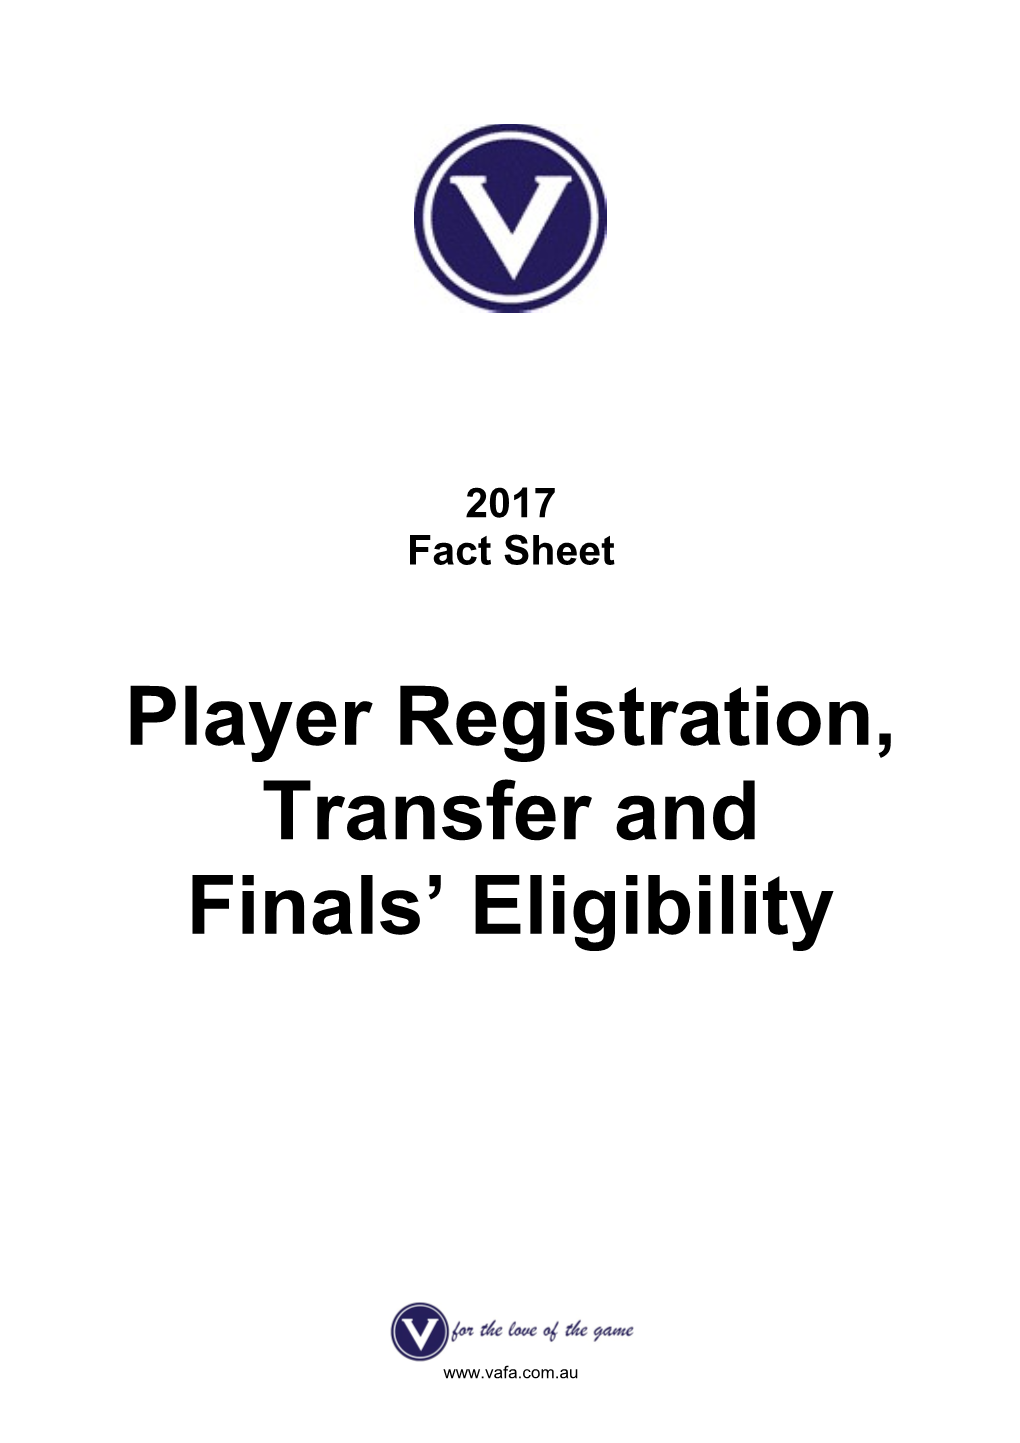 Player Registration, Transfer and Finals Eligibility